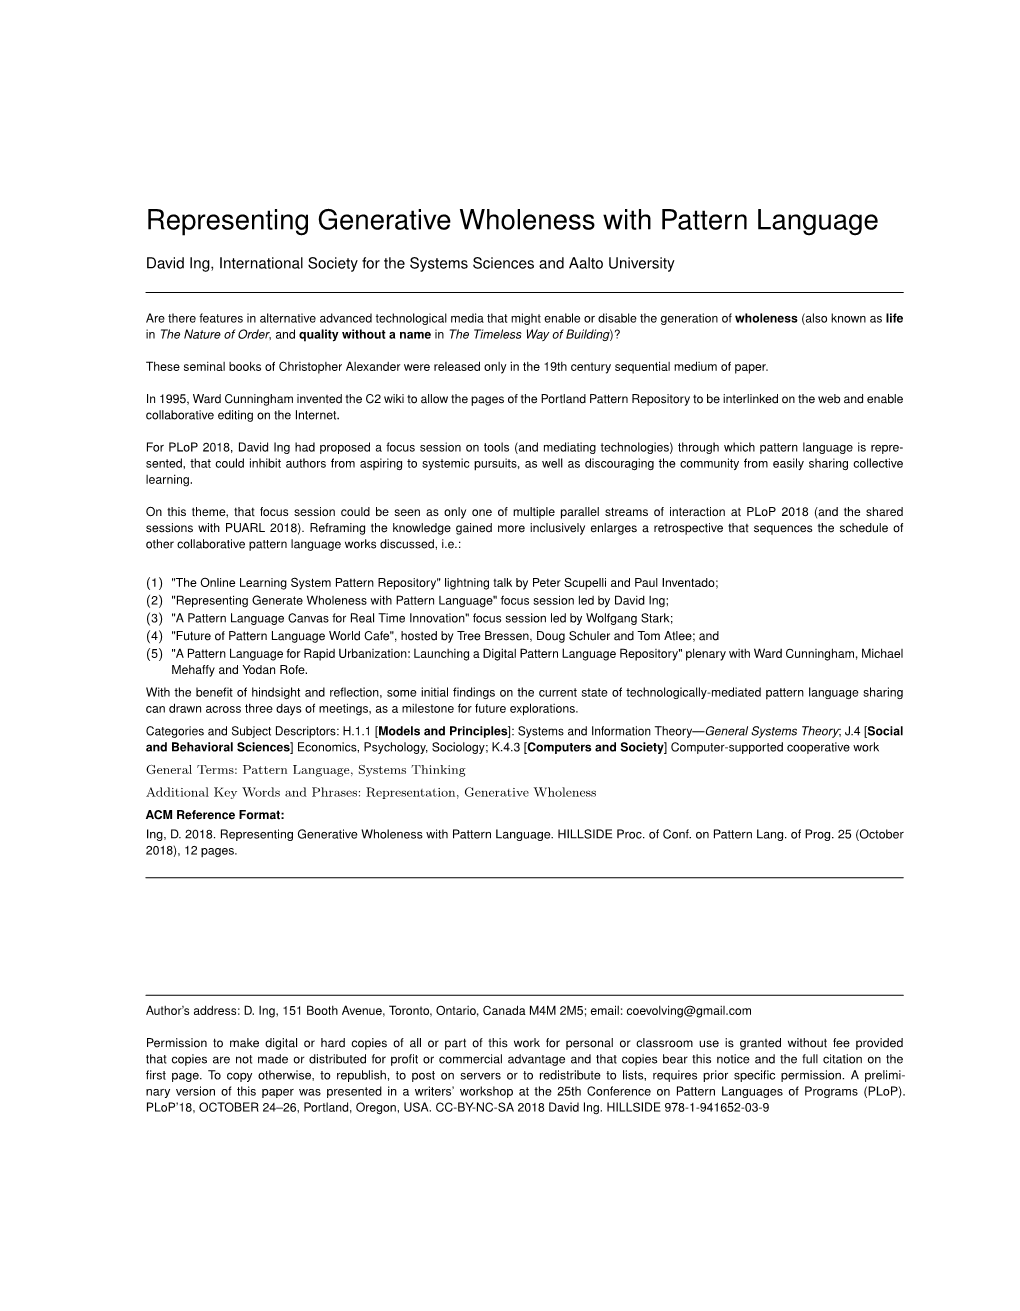 Representing Generative Wholeness with Pattern Language